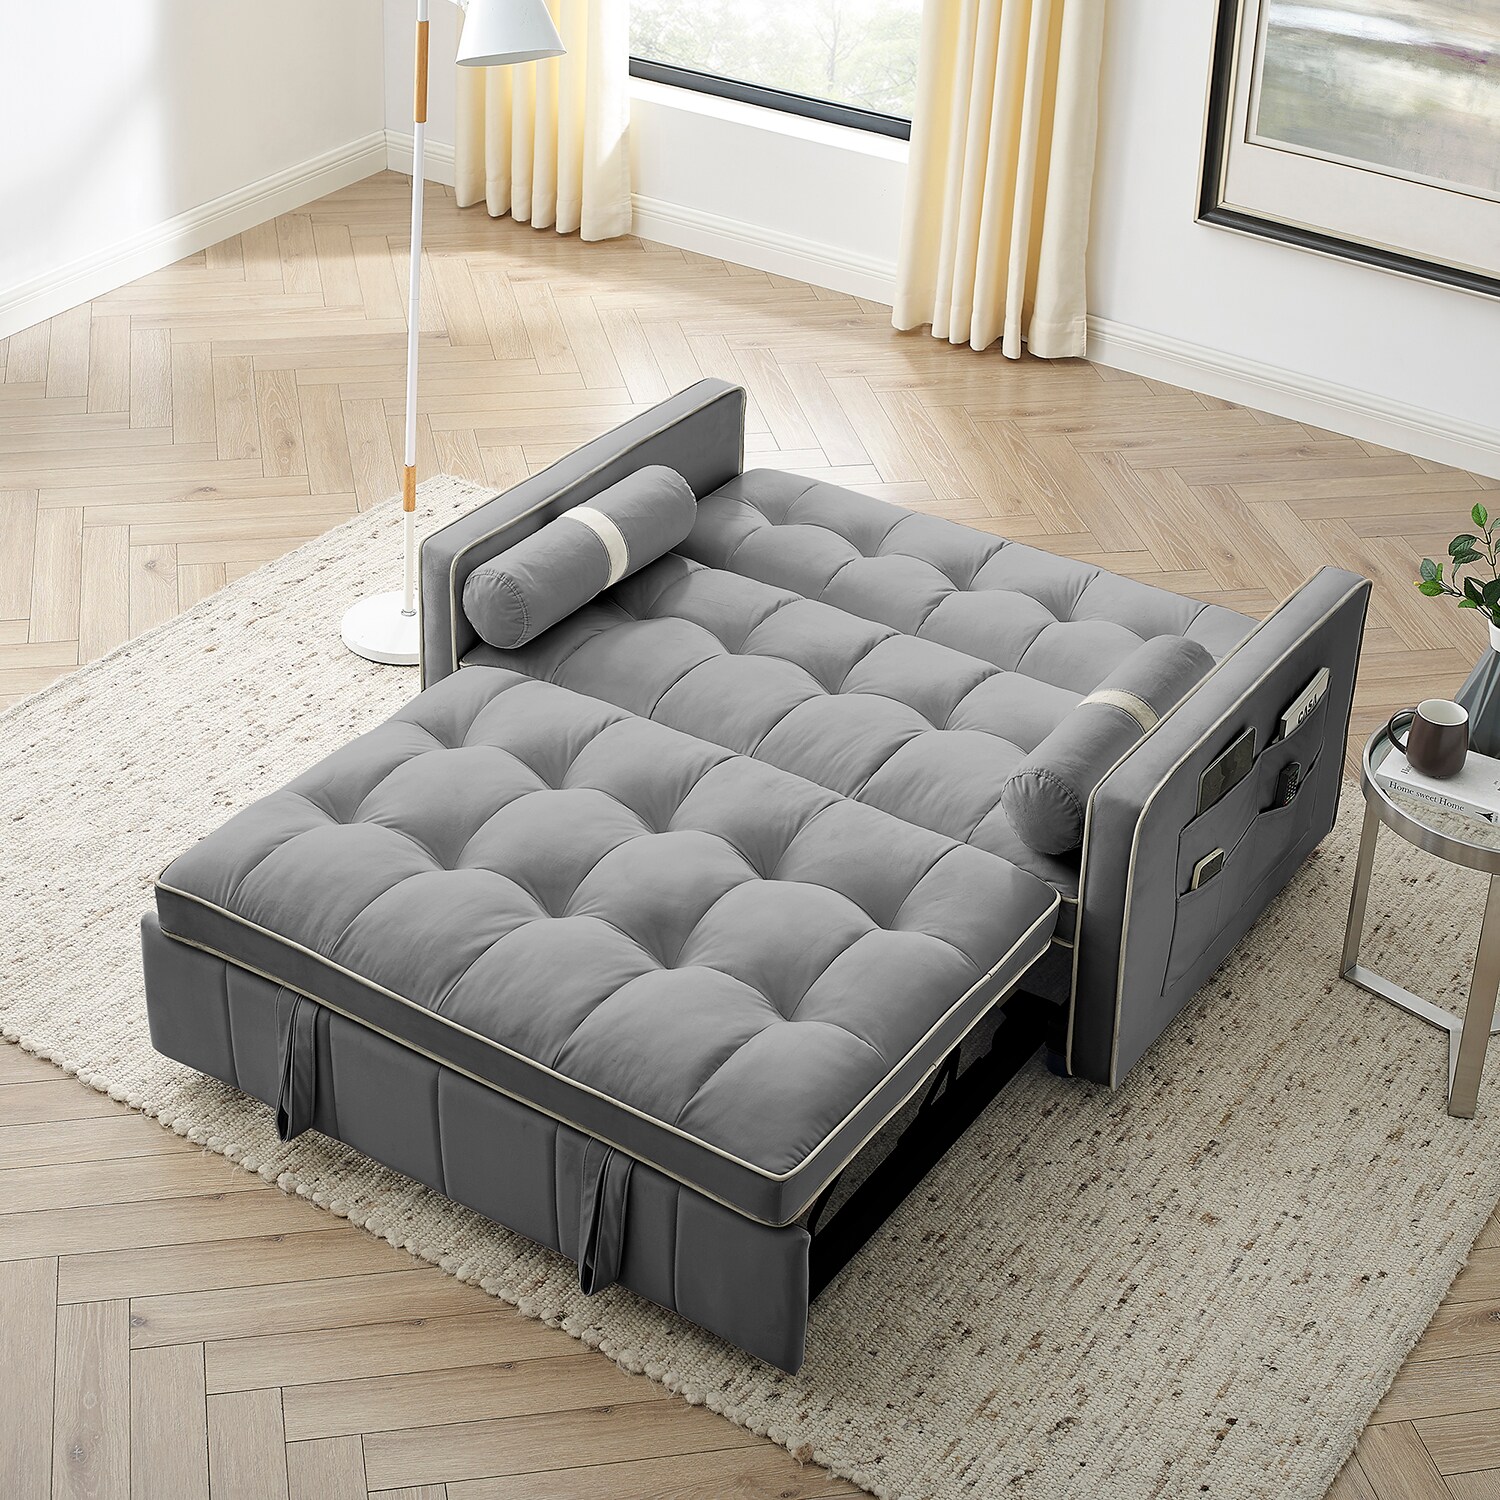 Convertable Velvet Futon Sofa Bed - Sofa with Sofa Sleeper for Living Room,  Comfy Velvet Fabric with High Density Memory Foam Couch for Office,  Apartment bedroom Living room Light Grey 